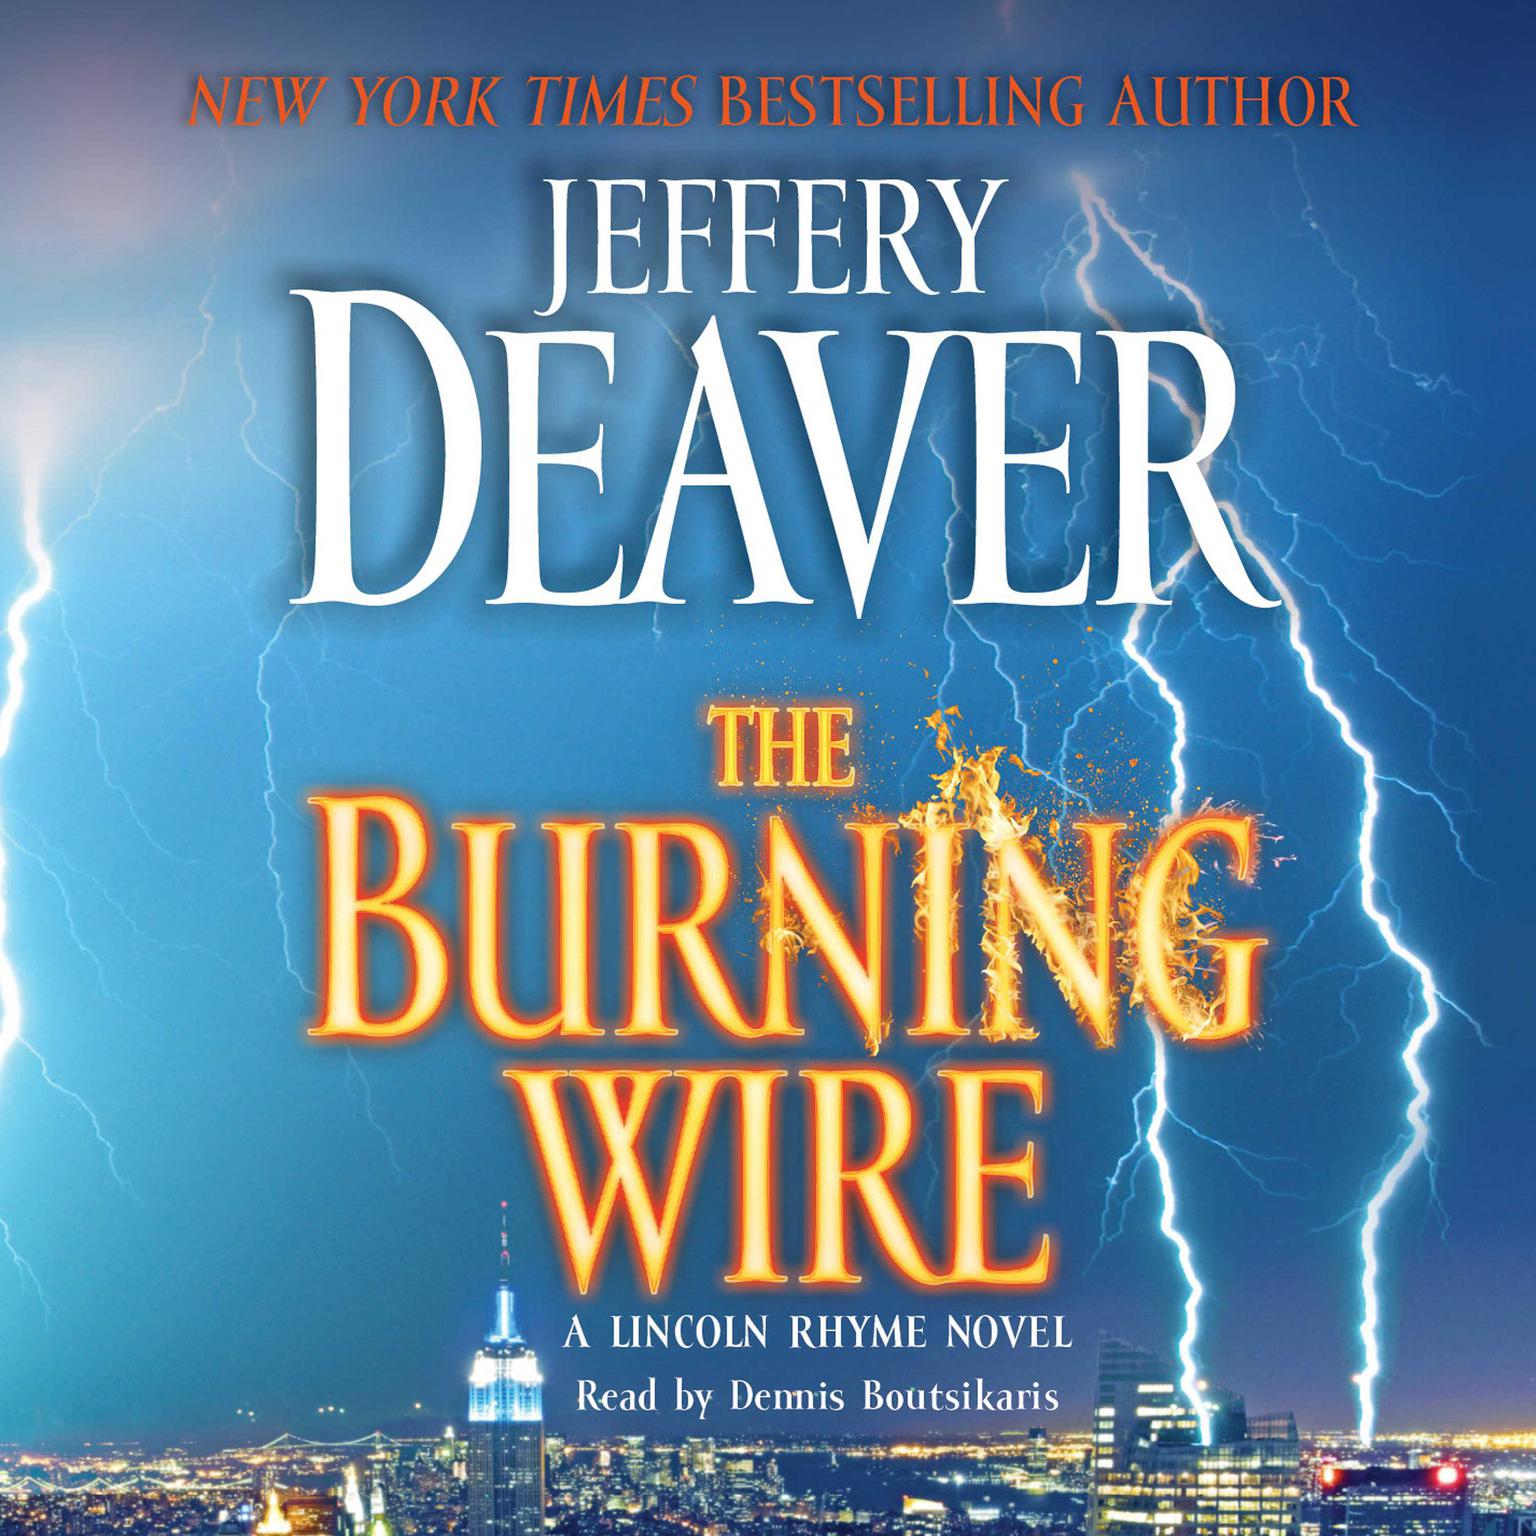 The Burning Wire (Abridged): A Lincoln Rhyme Novel Audiobook, by Jeffery Deaver